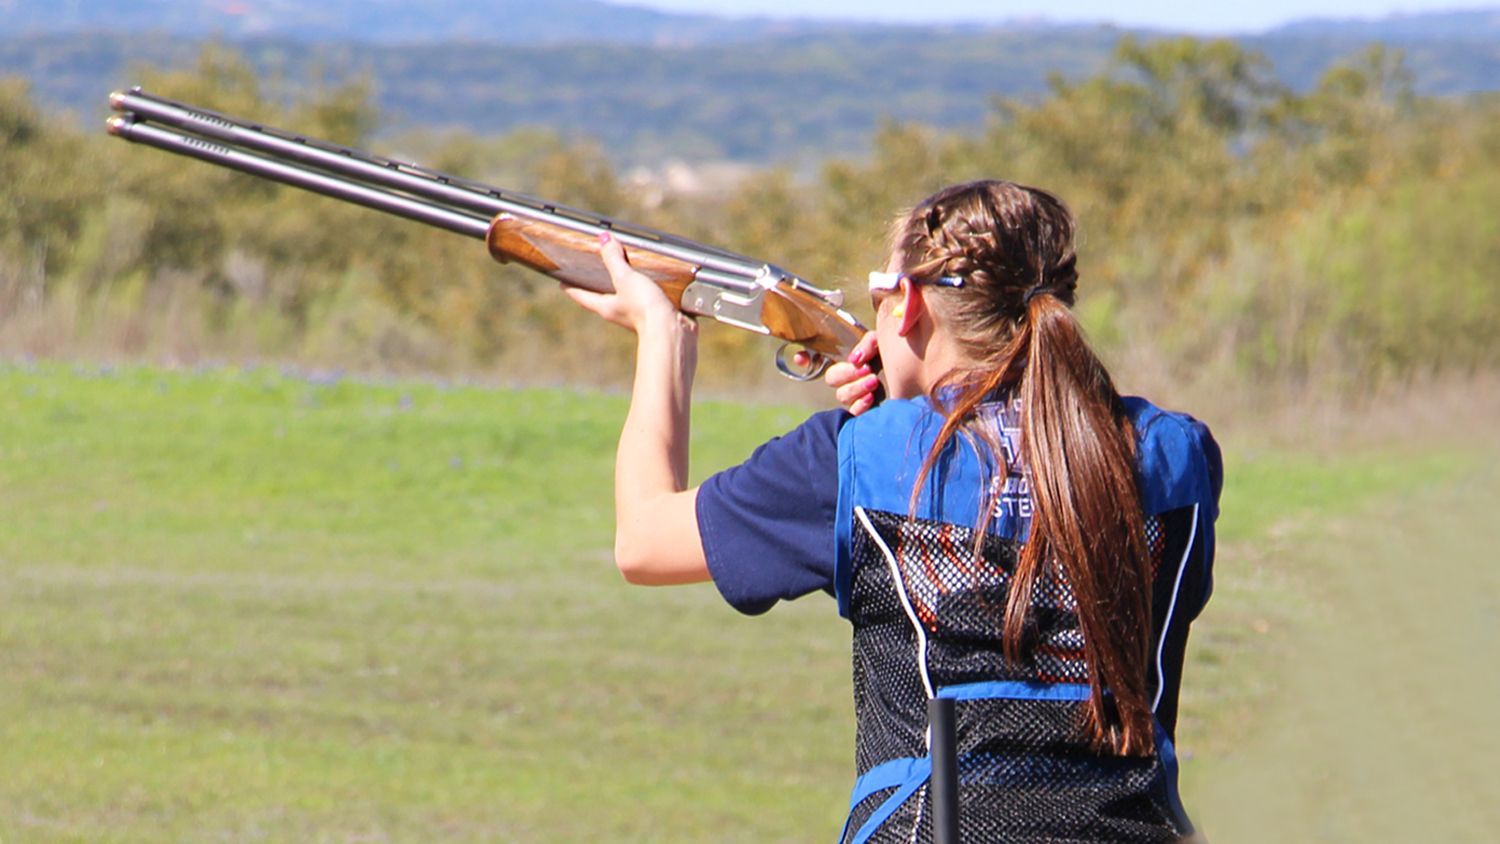 Scholarships Available At The Collegiate Clay Target Championships